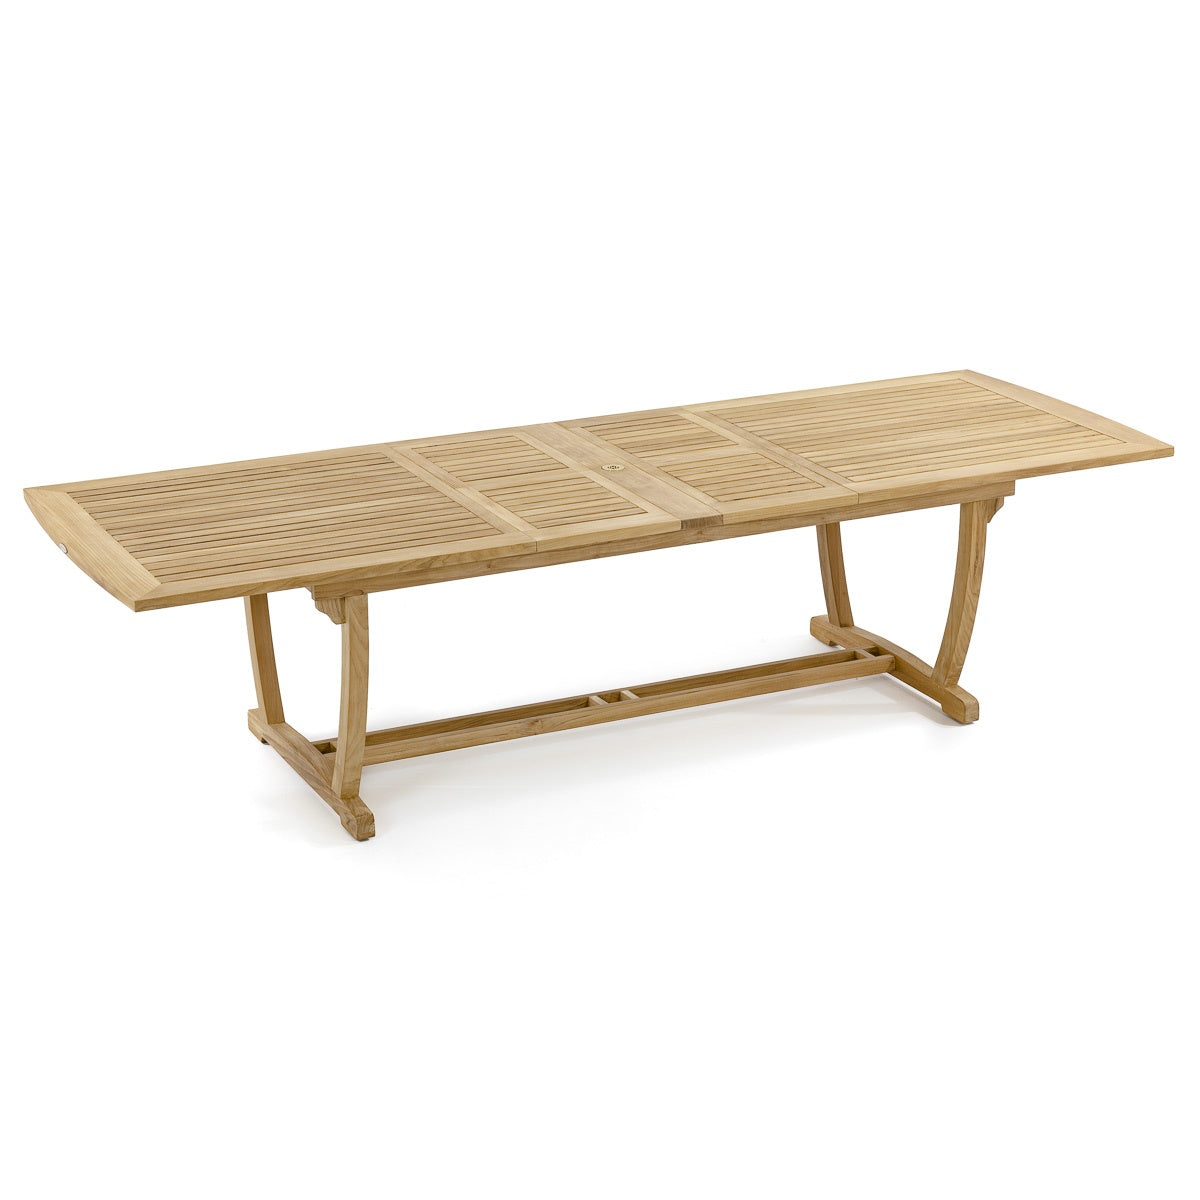 Westminster Teak - Veranda Teak Table Extends from 86" to 102" and 118" - 15585